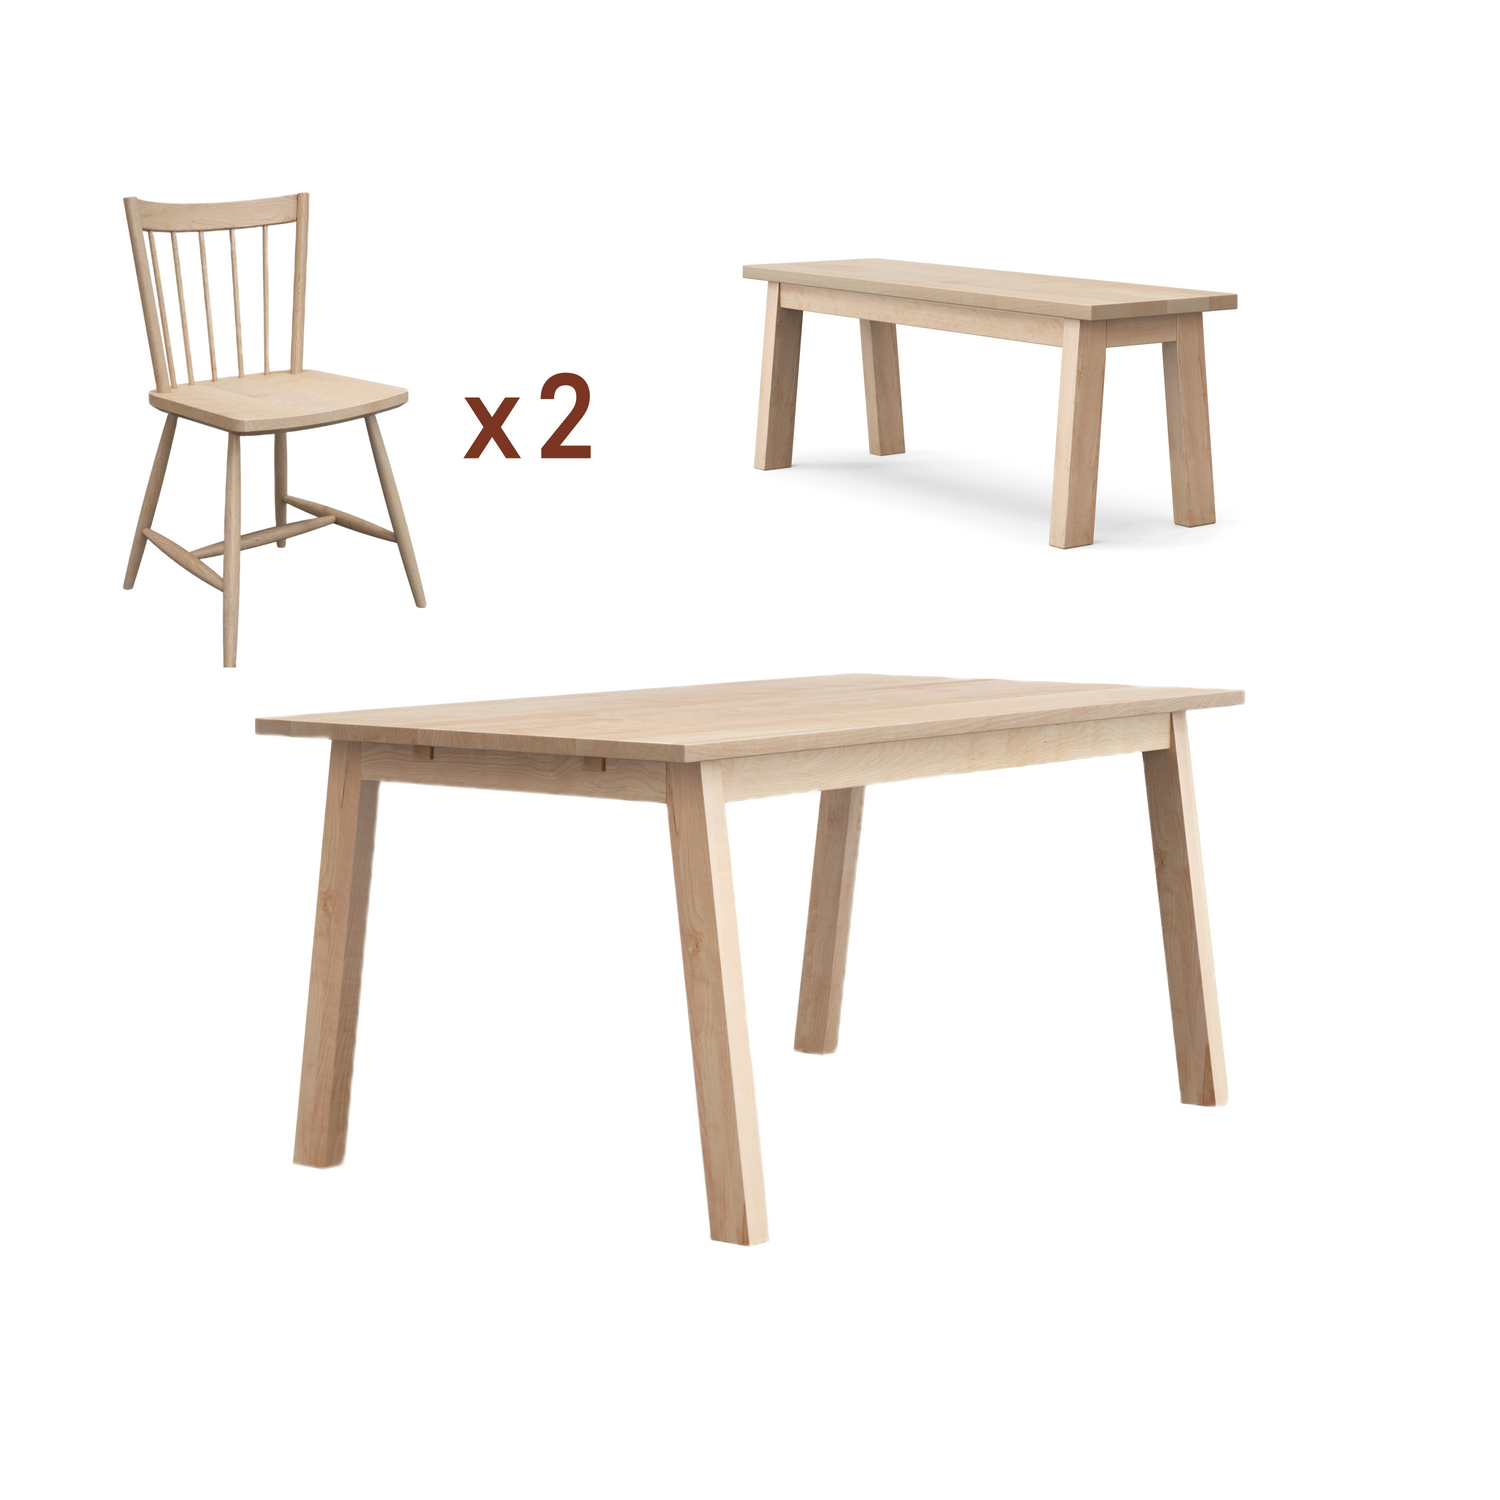 Luft table + chairs + bench